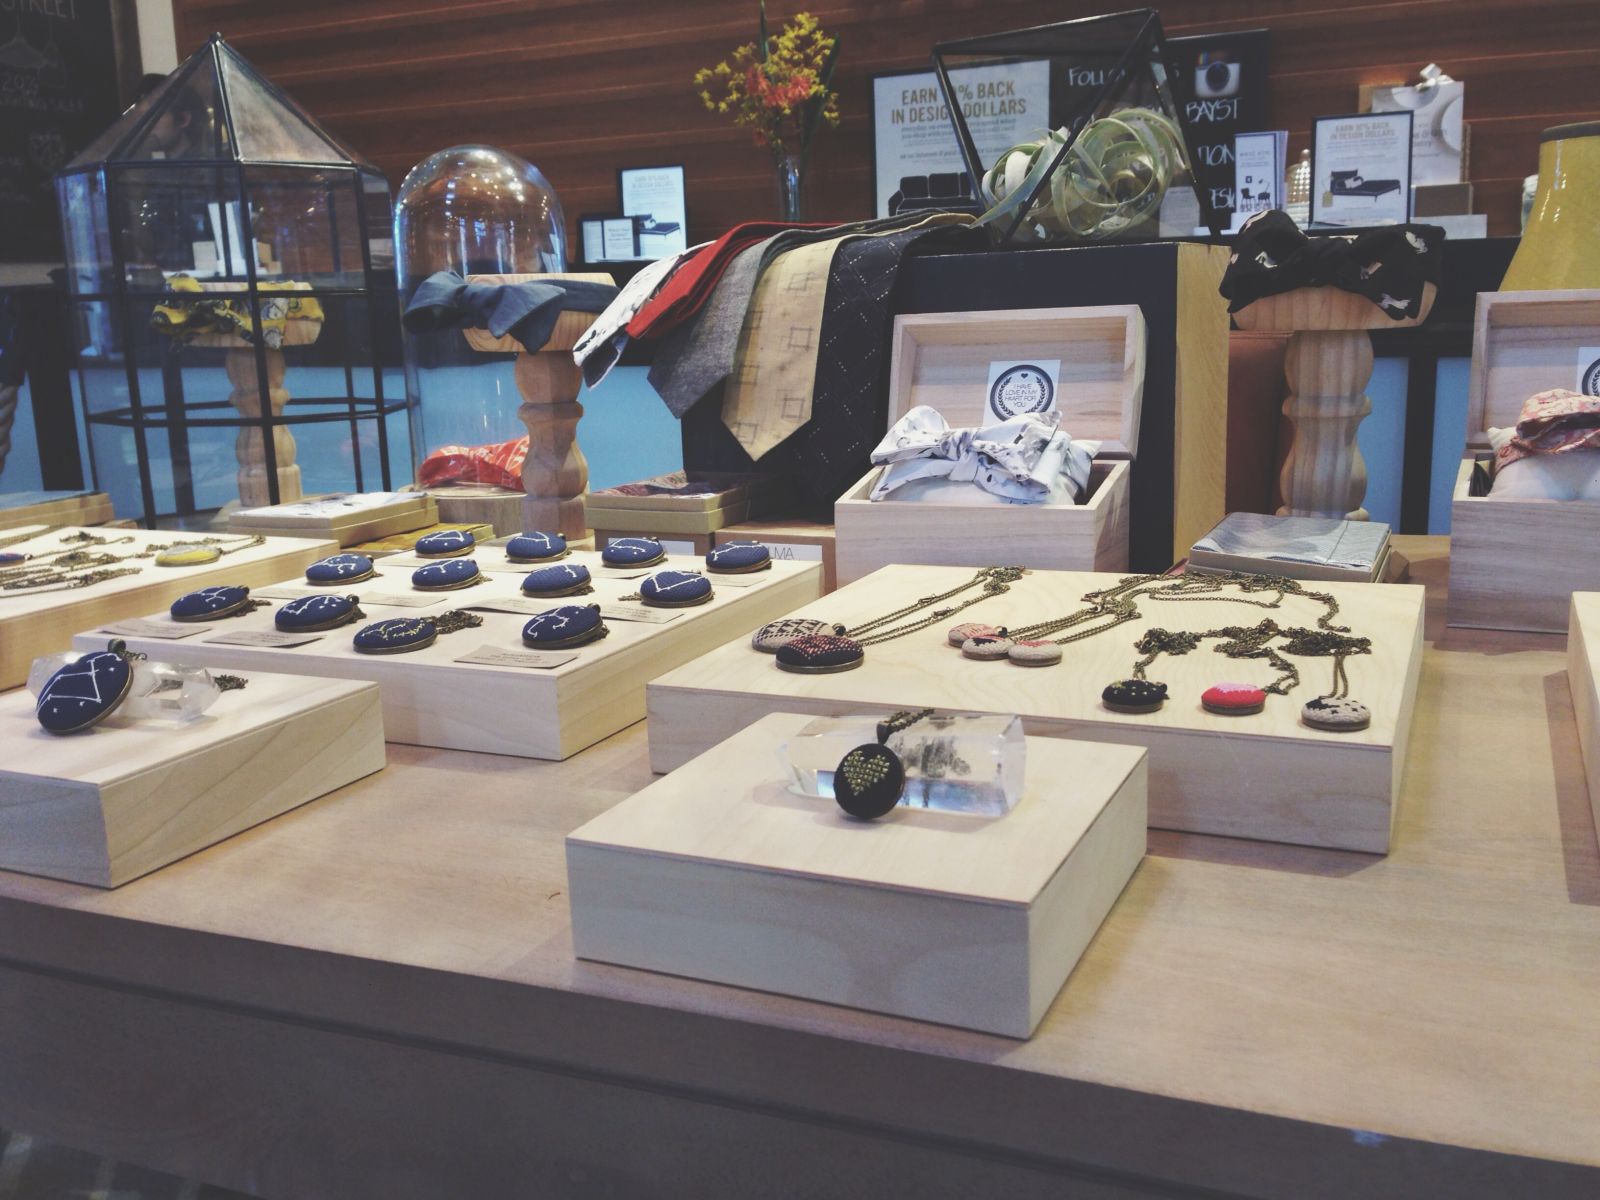 A neat and tidy space at the craft show will draw customers to your merchandise.